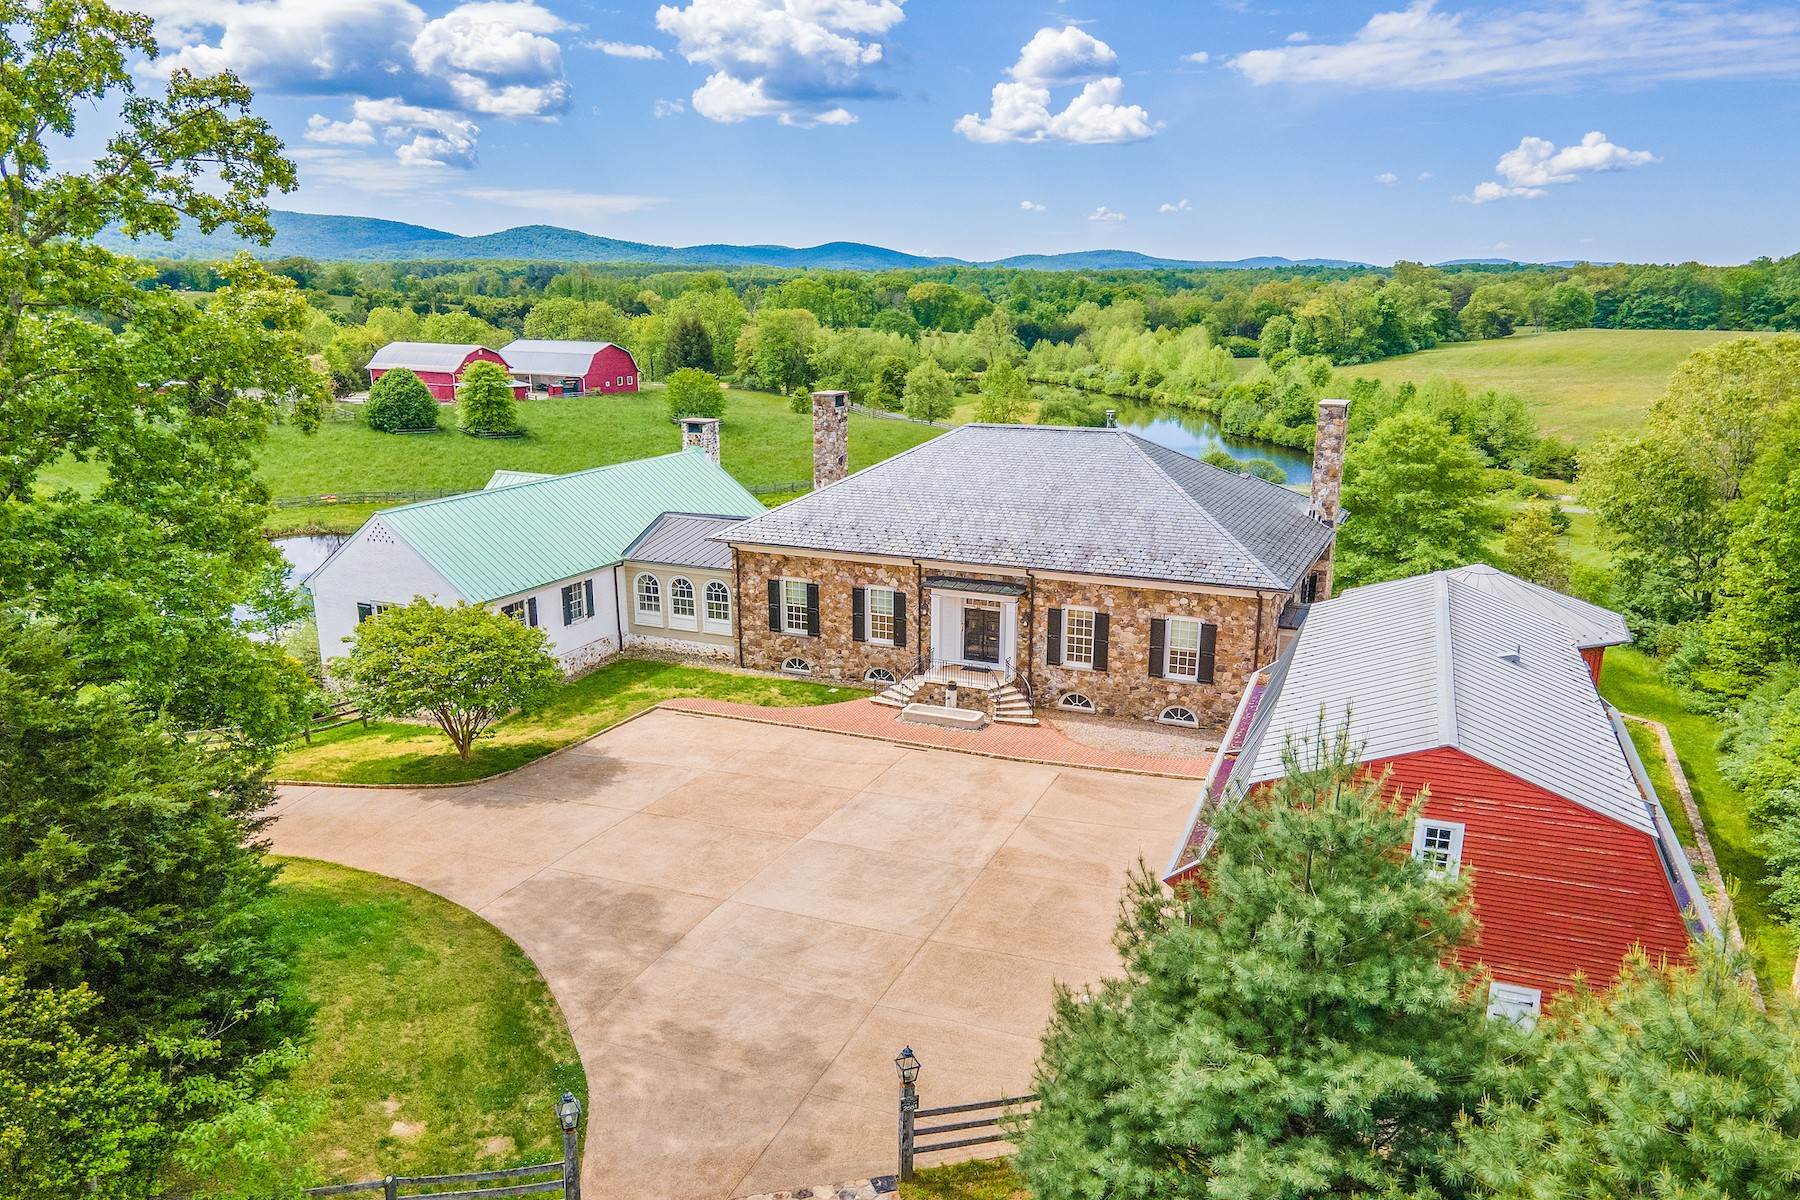 46. Farm and Ranch Properties for Sale at 2551 Someday Farm Lane Barboursville, Virginia 22923 United States